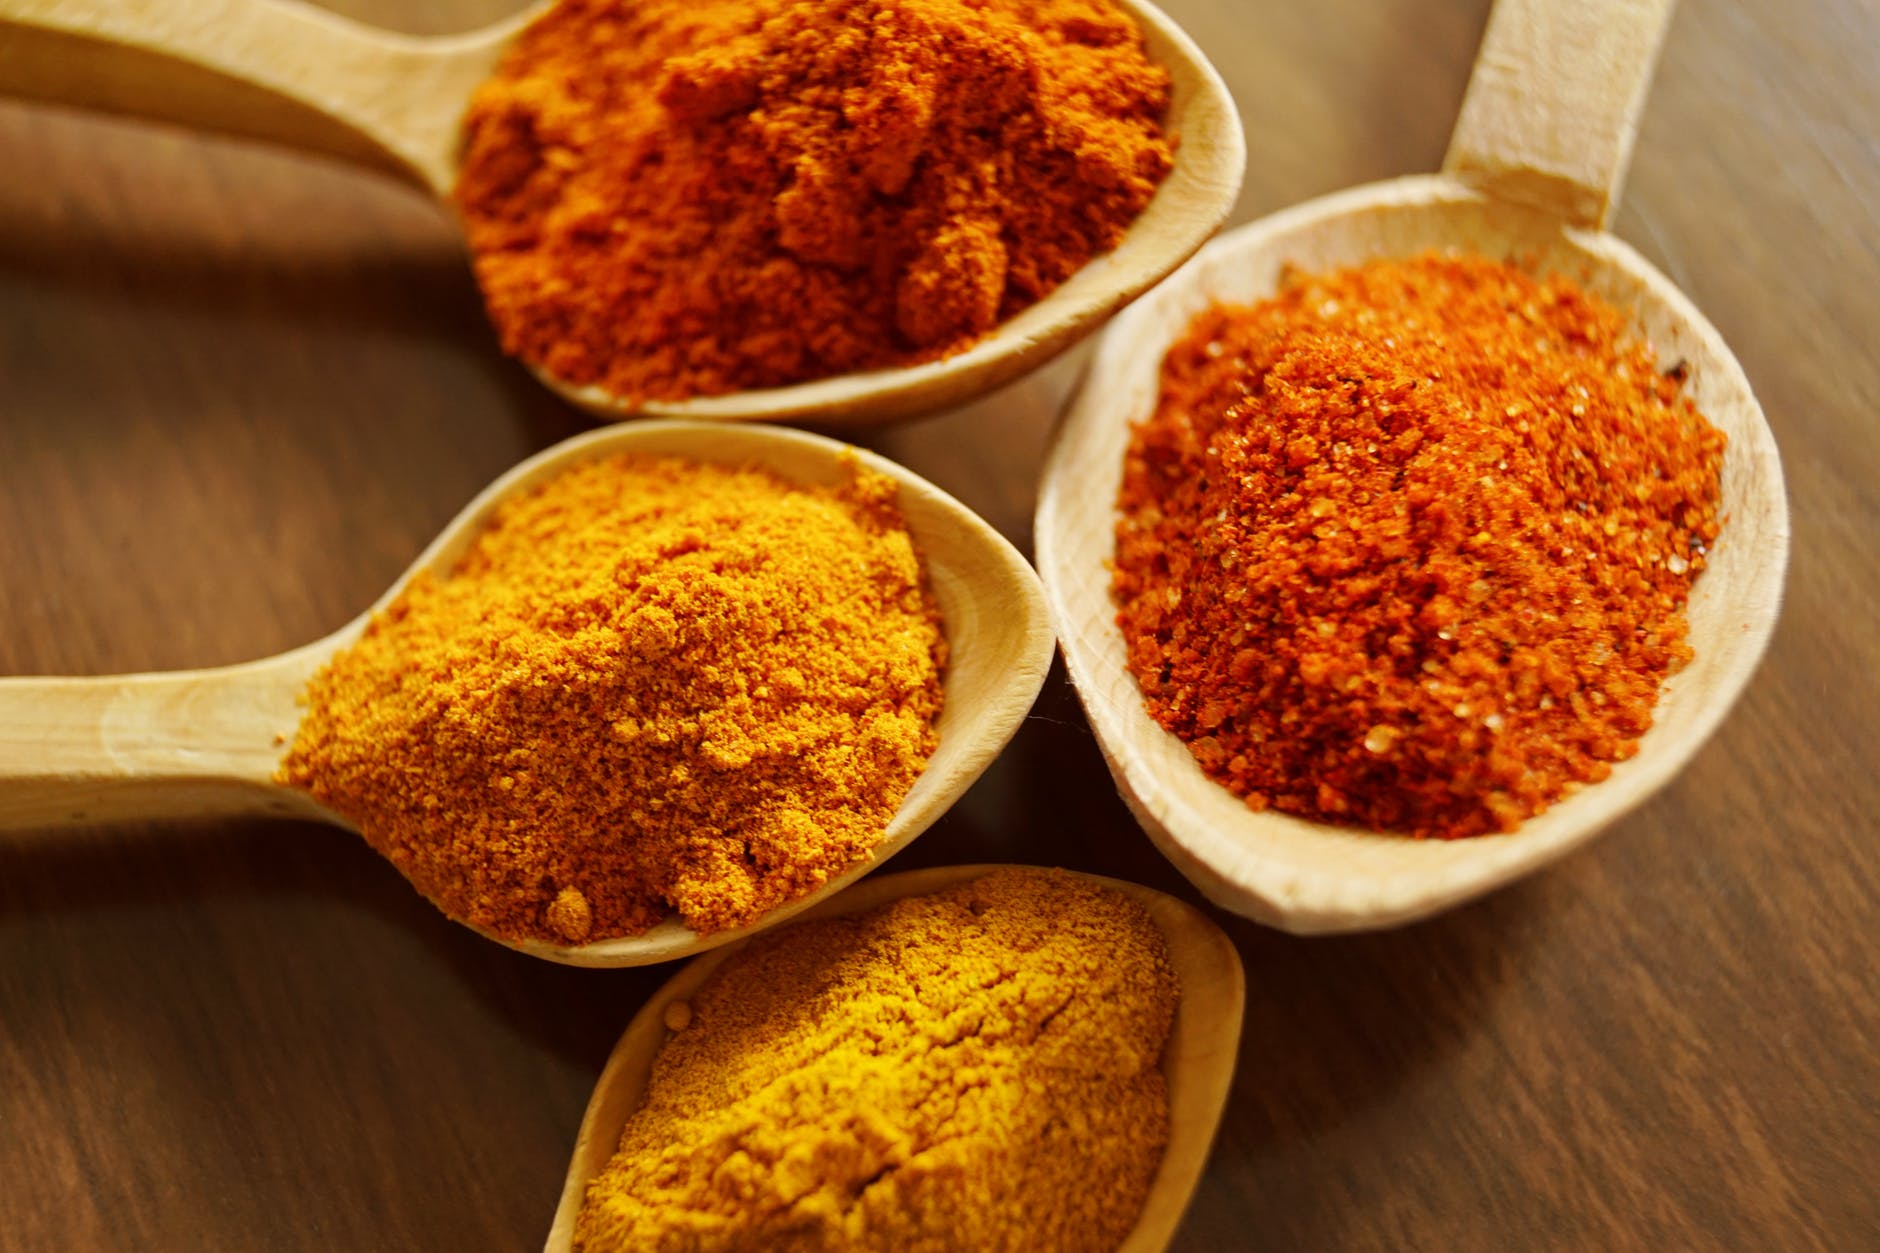 Curcumin for your brain and body